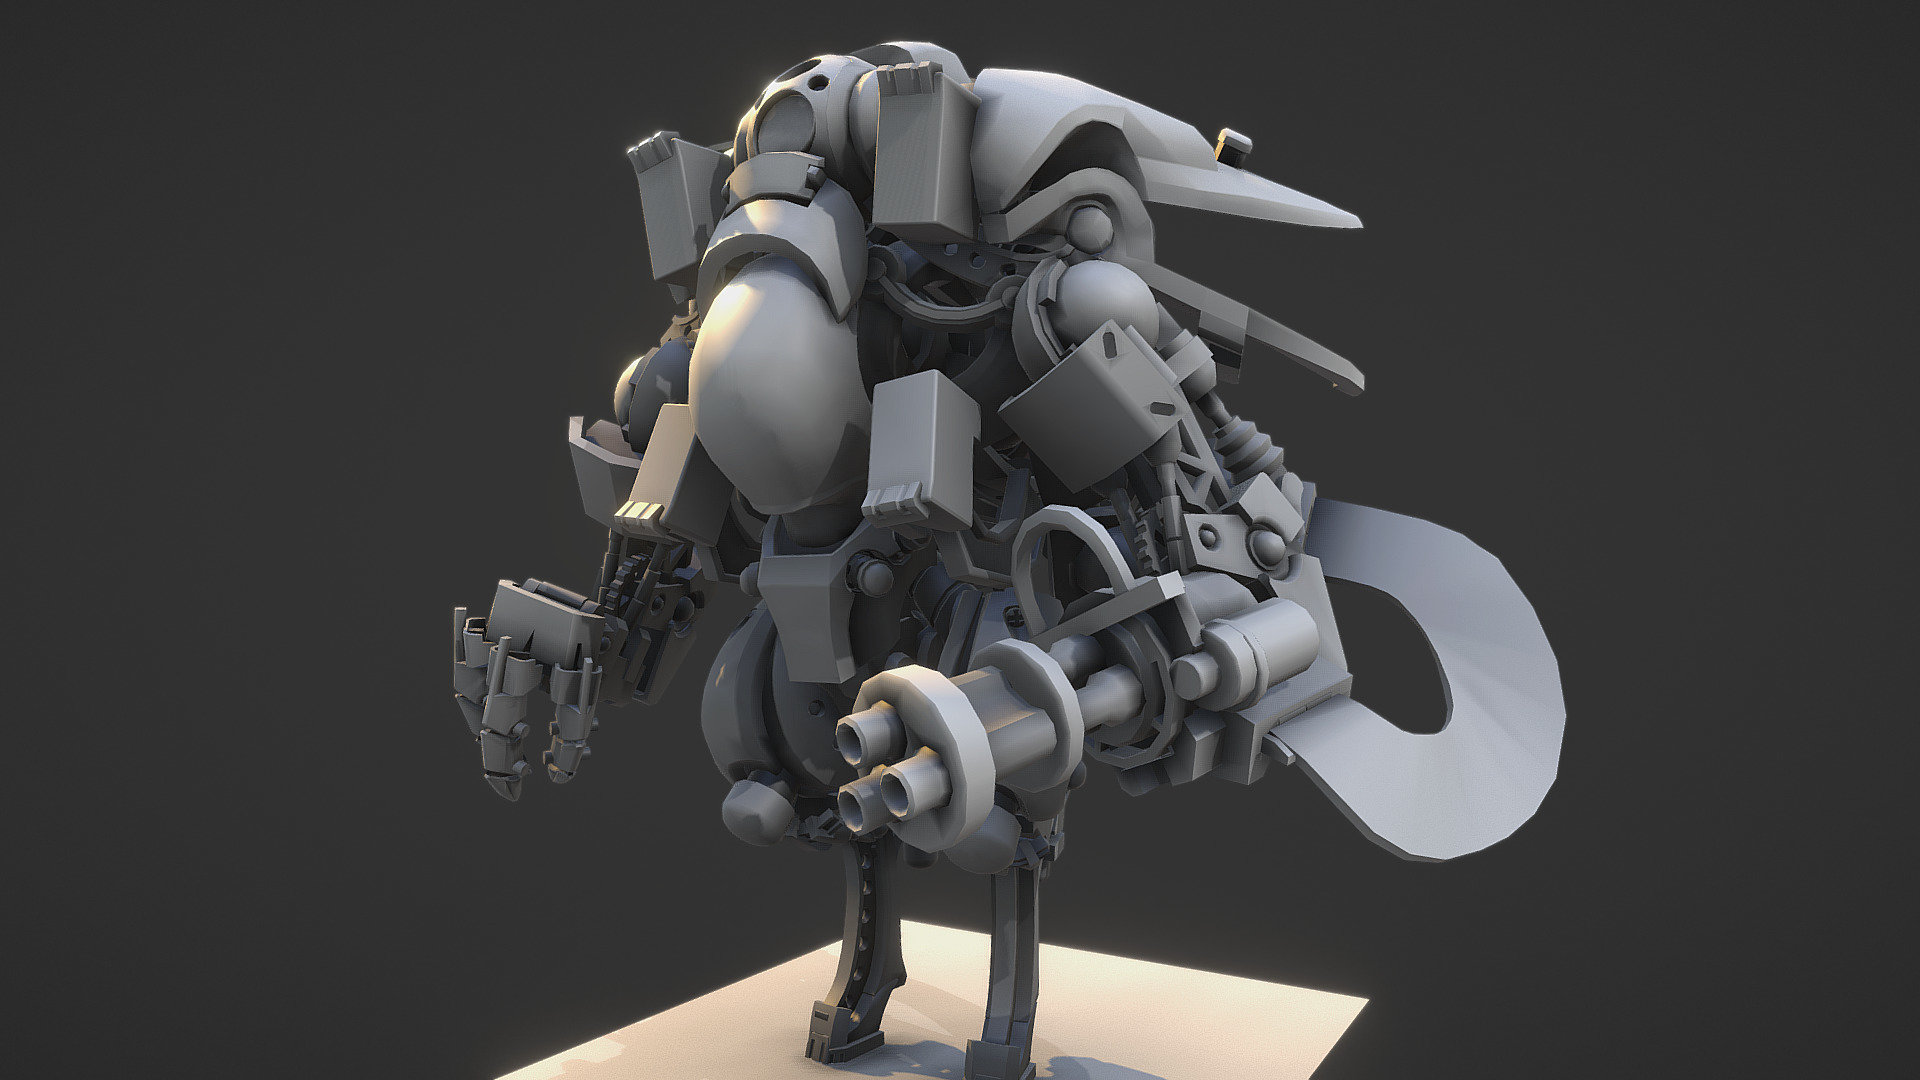 Update on this ongoing project.  Update at the silhouette of the mecha. Checking that is still able to properly fold in plane mode. Blocking stage. Moar to come 3d model